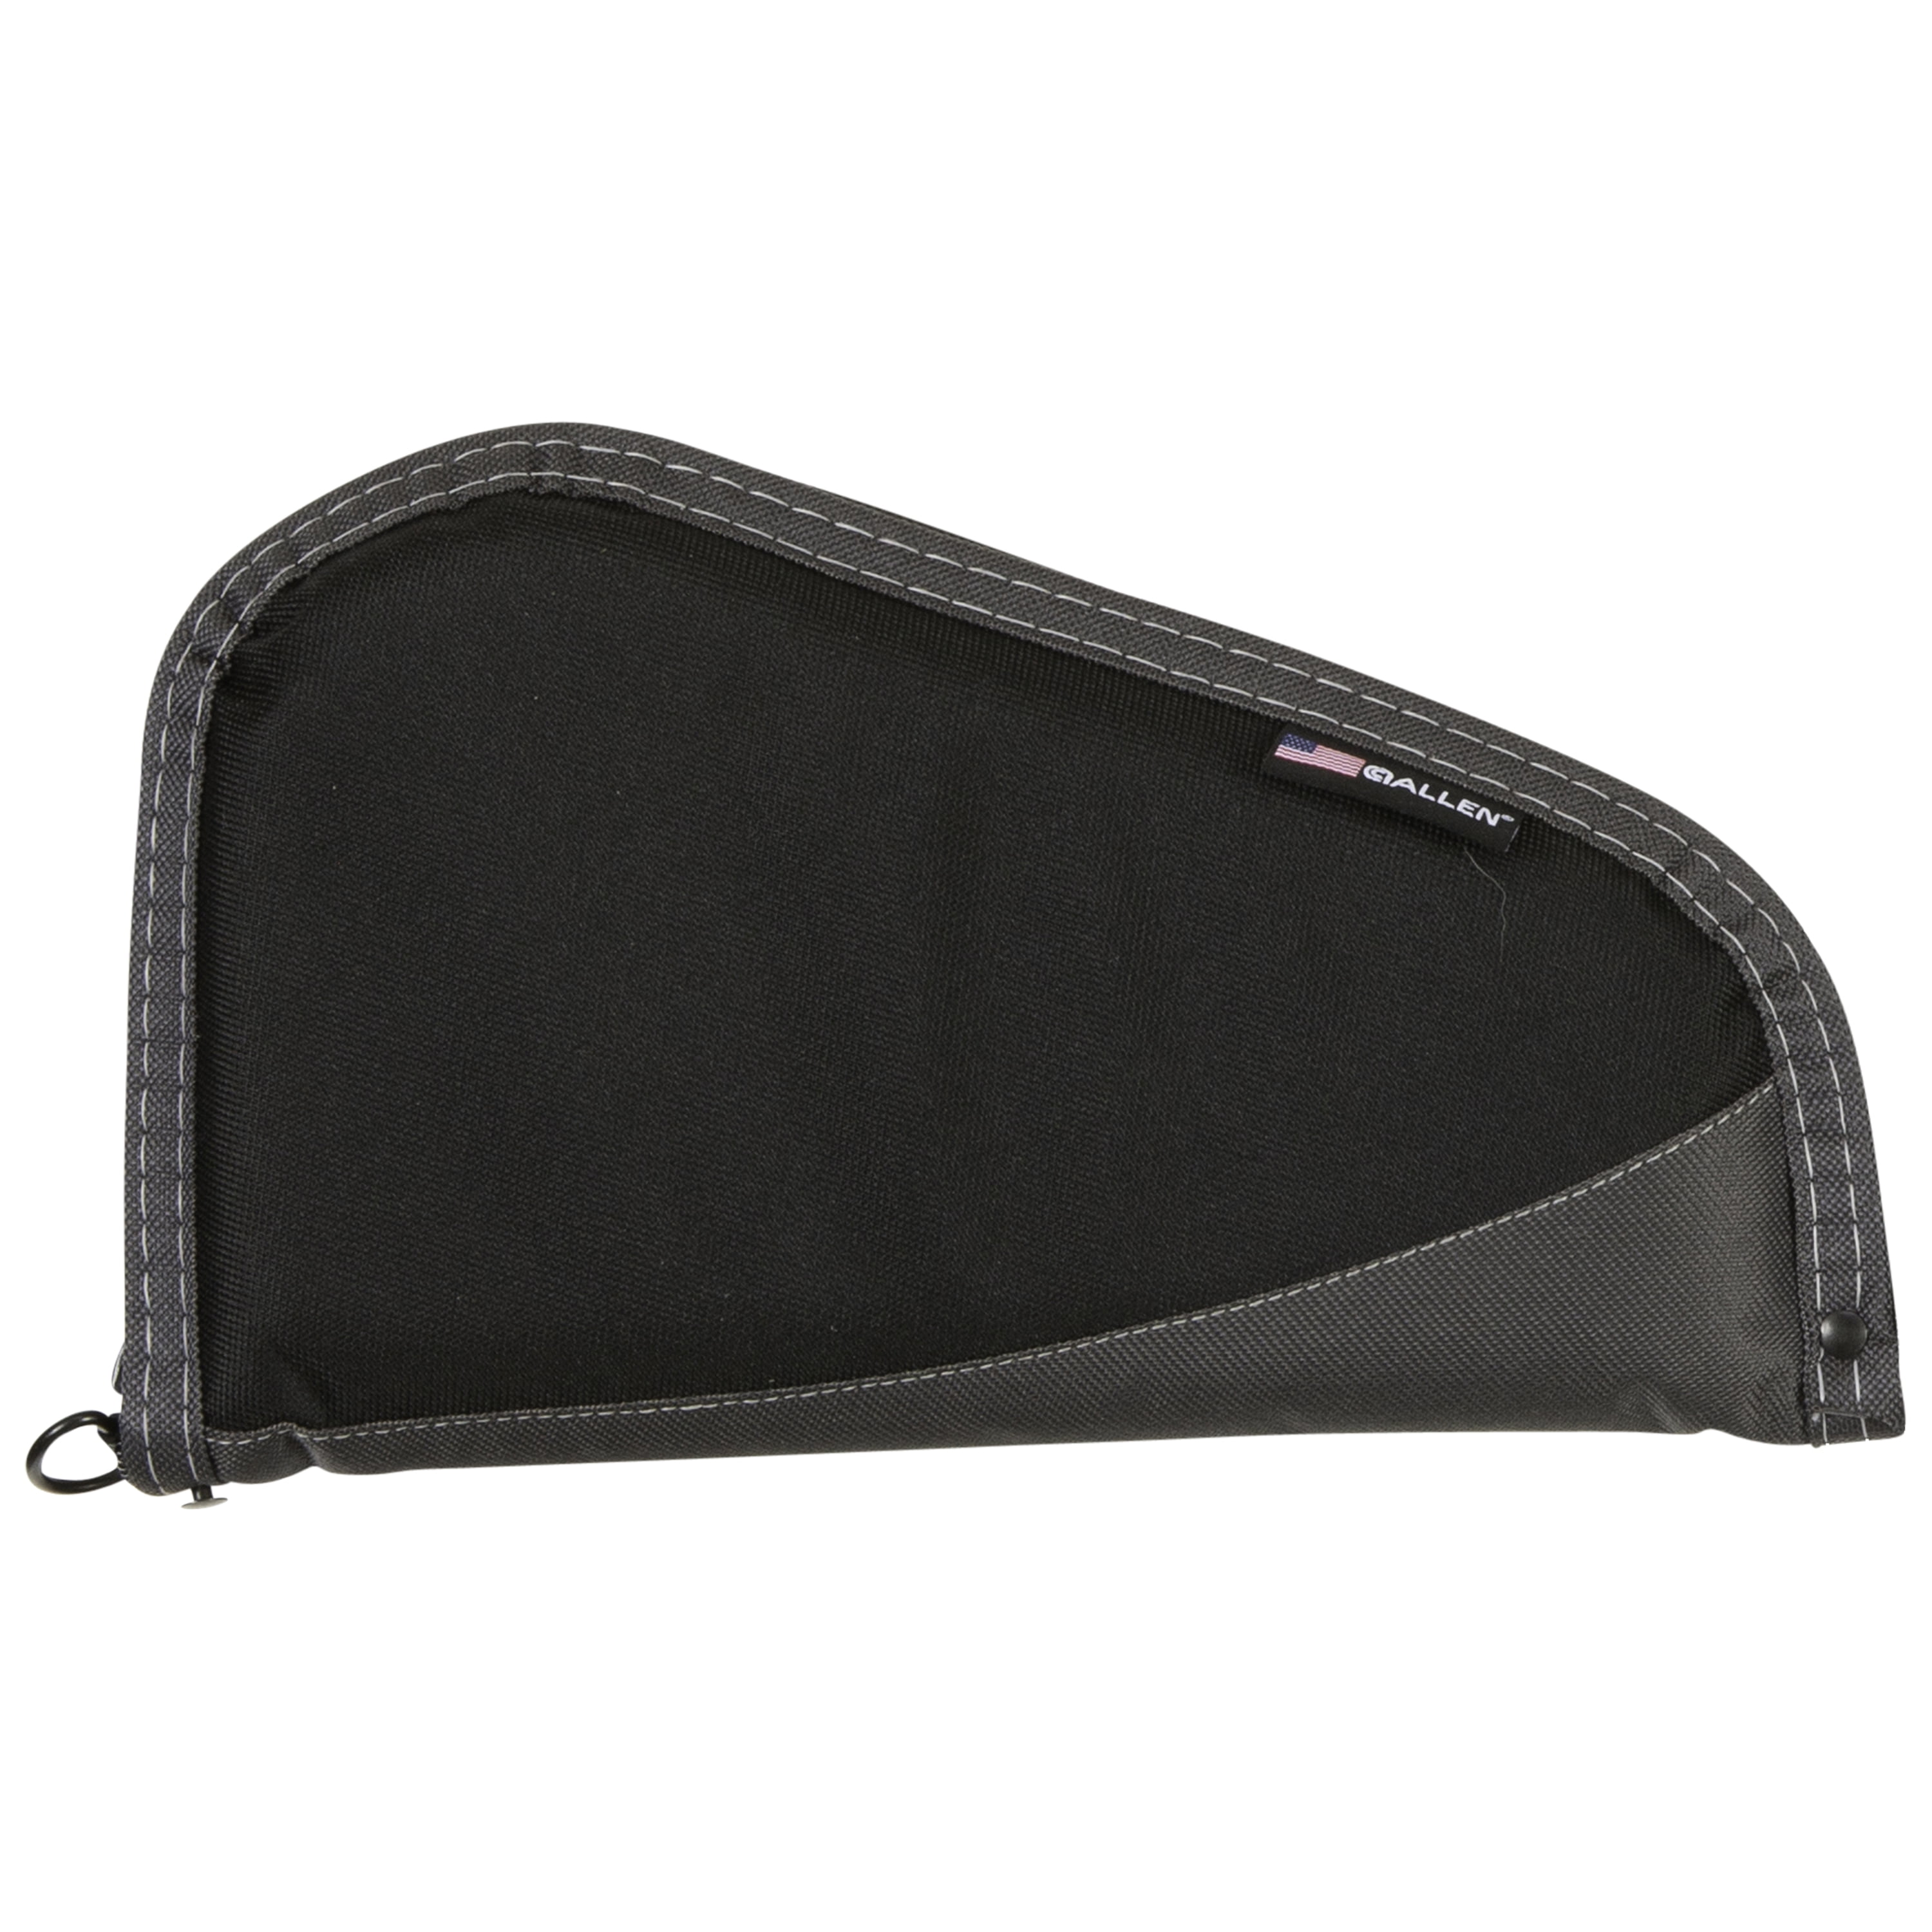 P-4 P4 7" x 12" Bore-Stores Handgun Case Silicone Treated Gray or Pink 